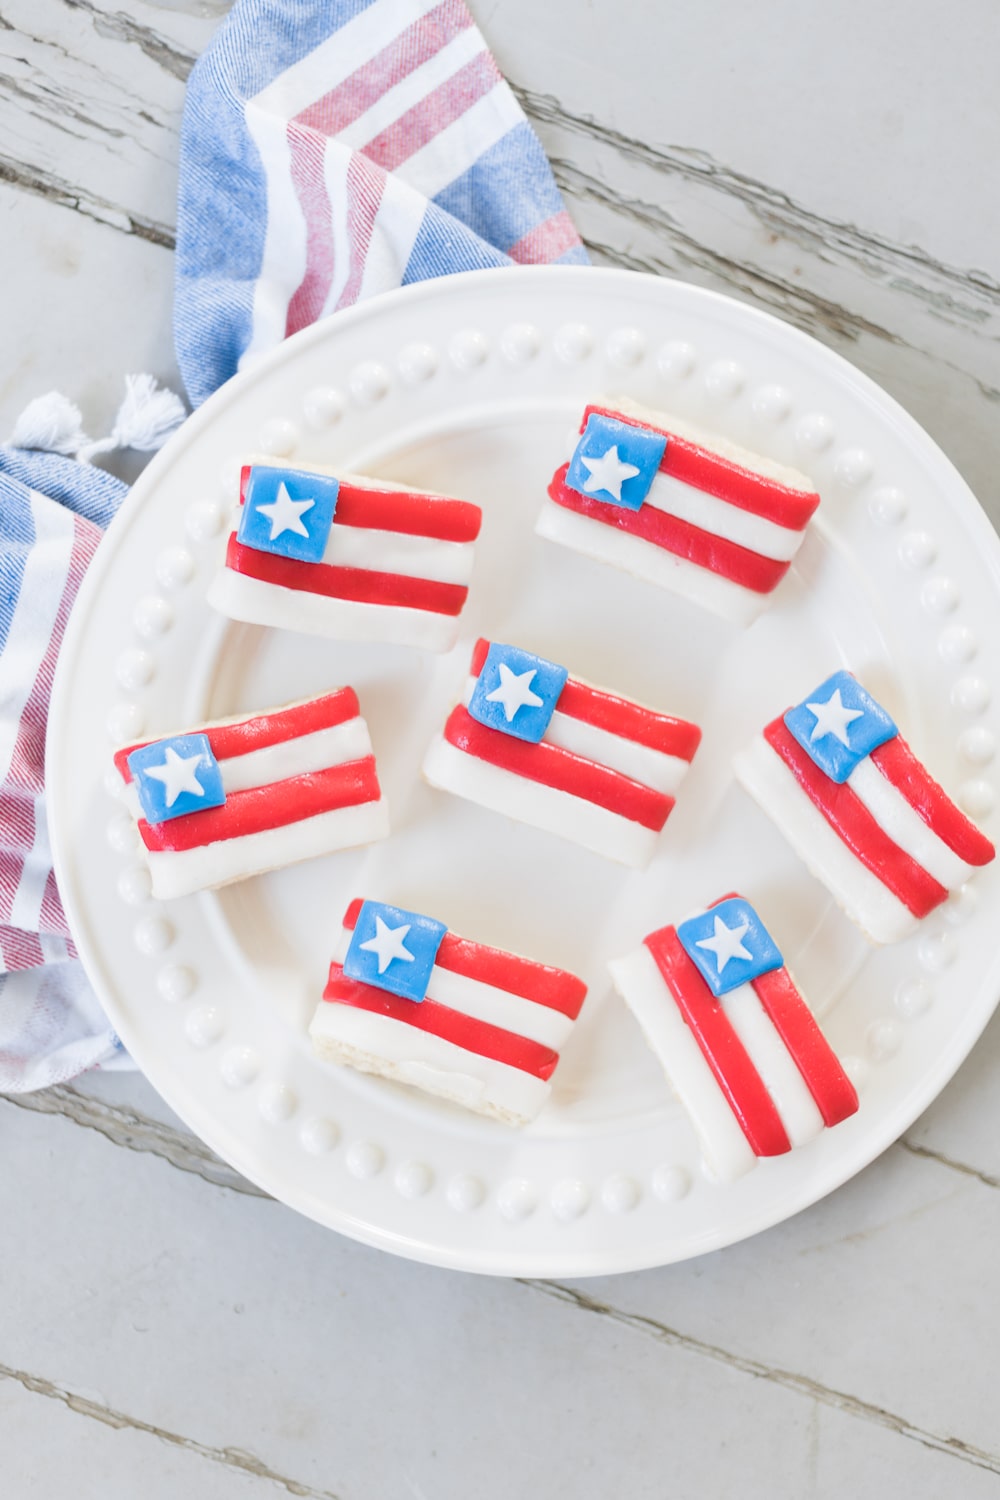 red white and blue rice krispie treats created by blogger Stephanie Ziajka on Diary of a Debutante